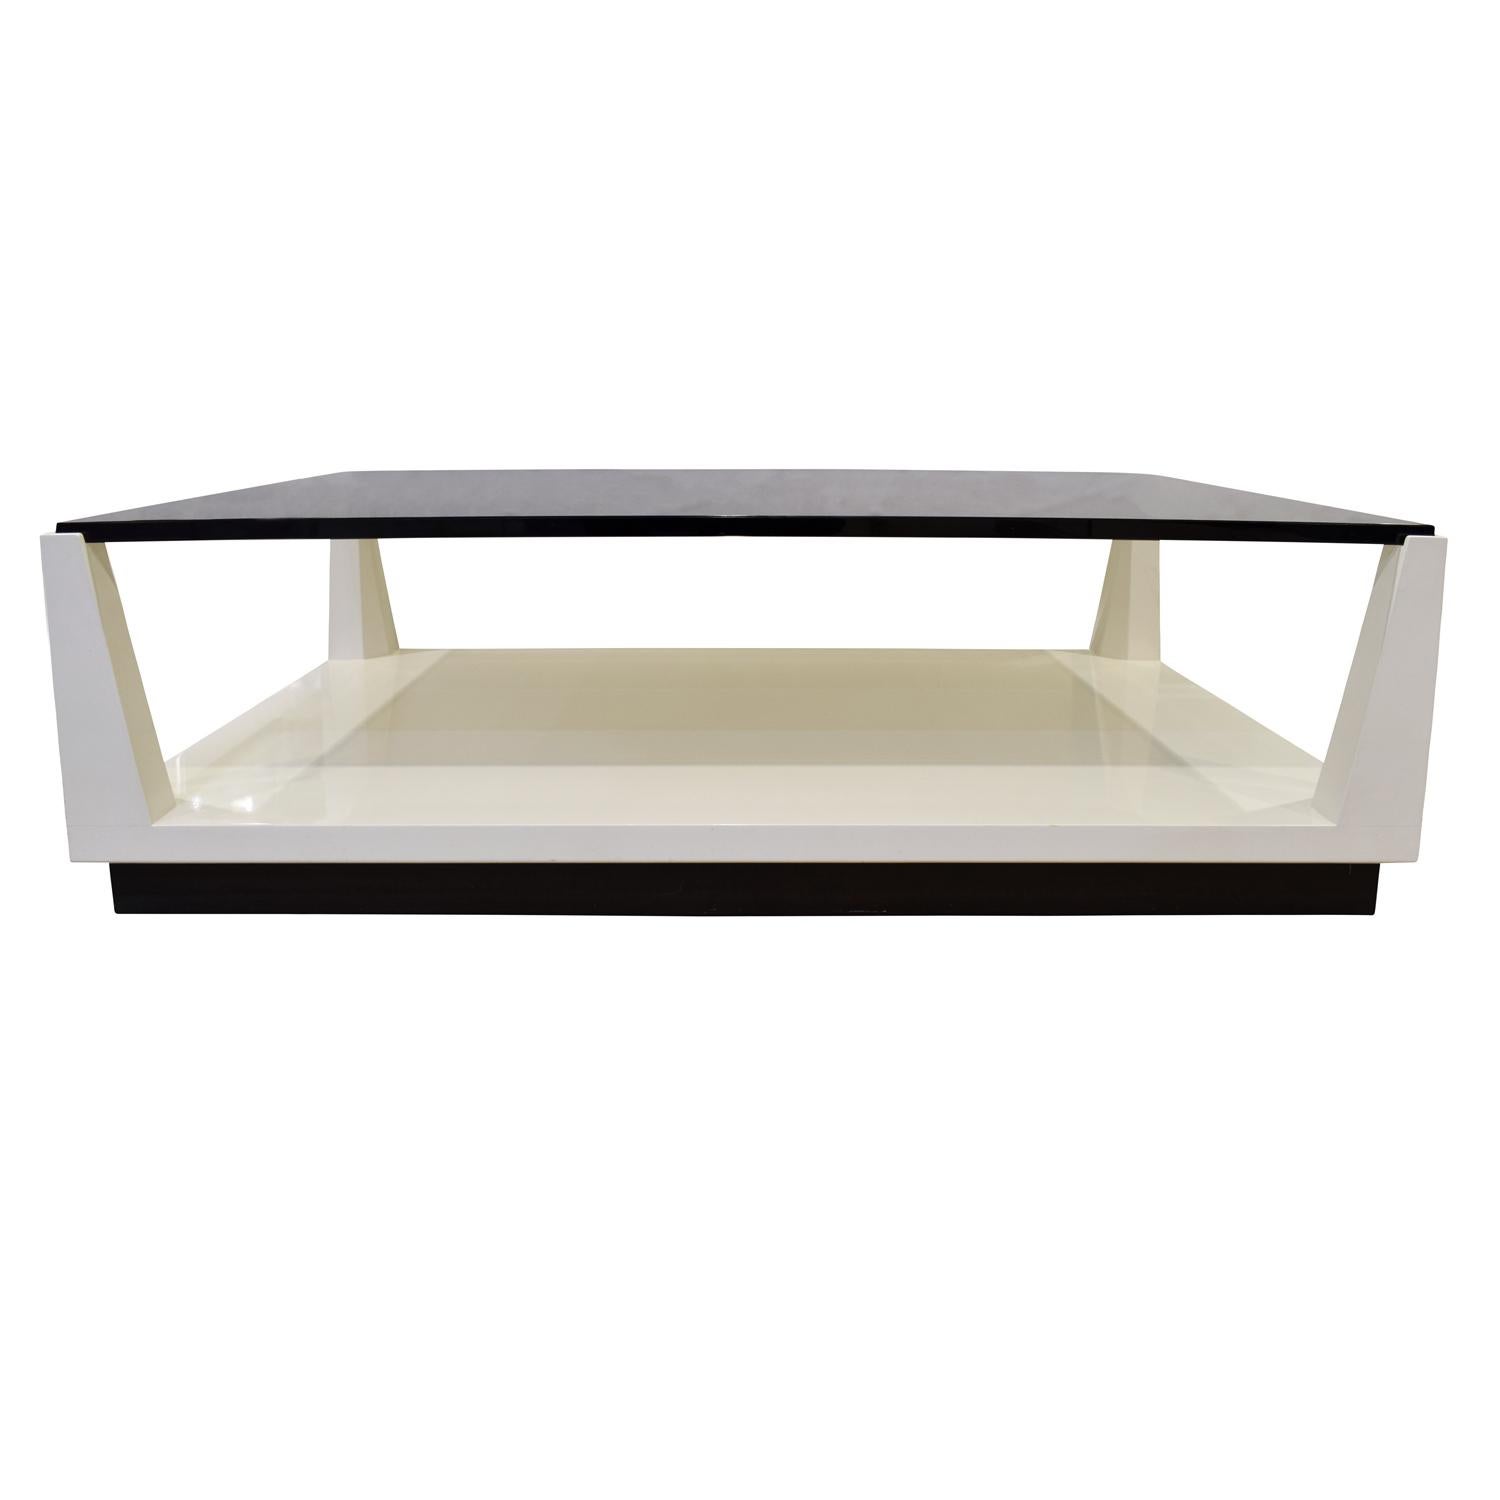 American Tommi Parzinger Lacquered Coffee Table with Smoke Glass Top, 1970s